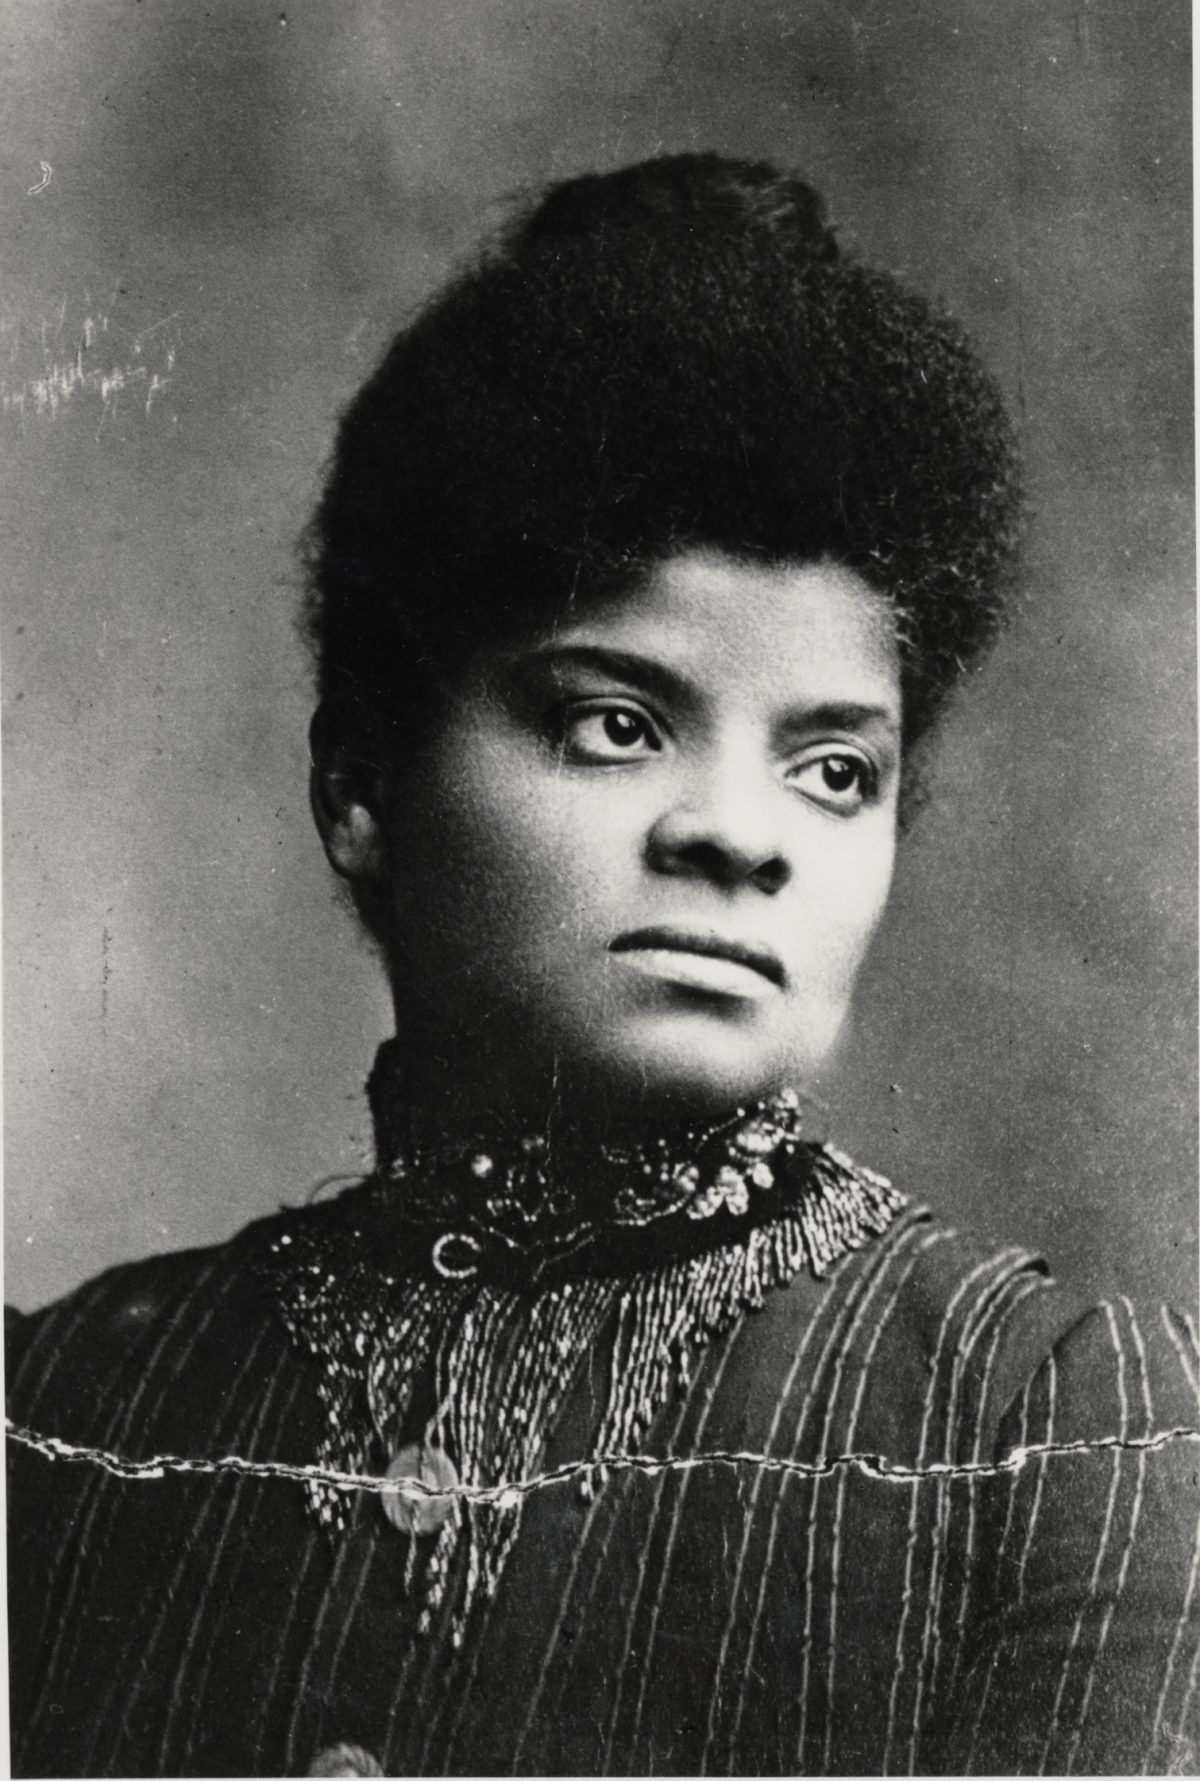 An image of Ida B. Wells around the age of 30. She is depicted from chest-level to the top of her head and wearing a dark top that covers her shoulders and neck. It has an elaborate collar. Her head is turned to the side and her hair is pulled back. 